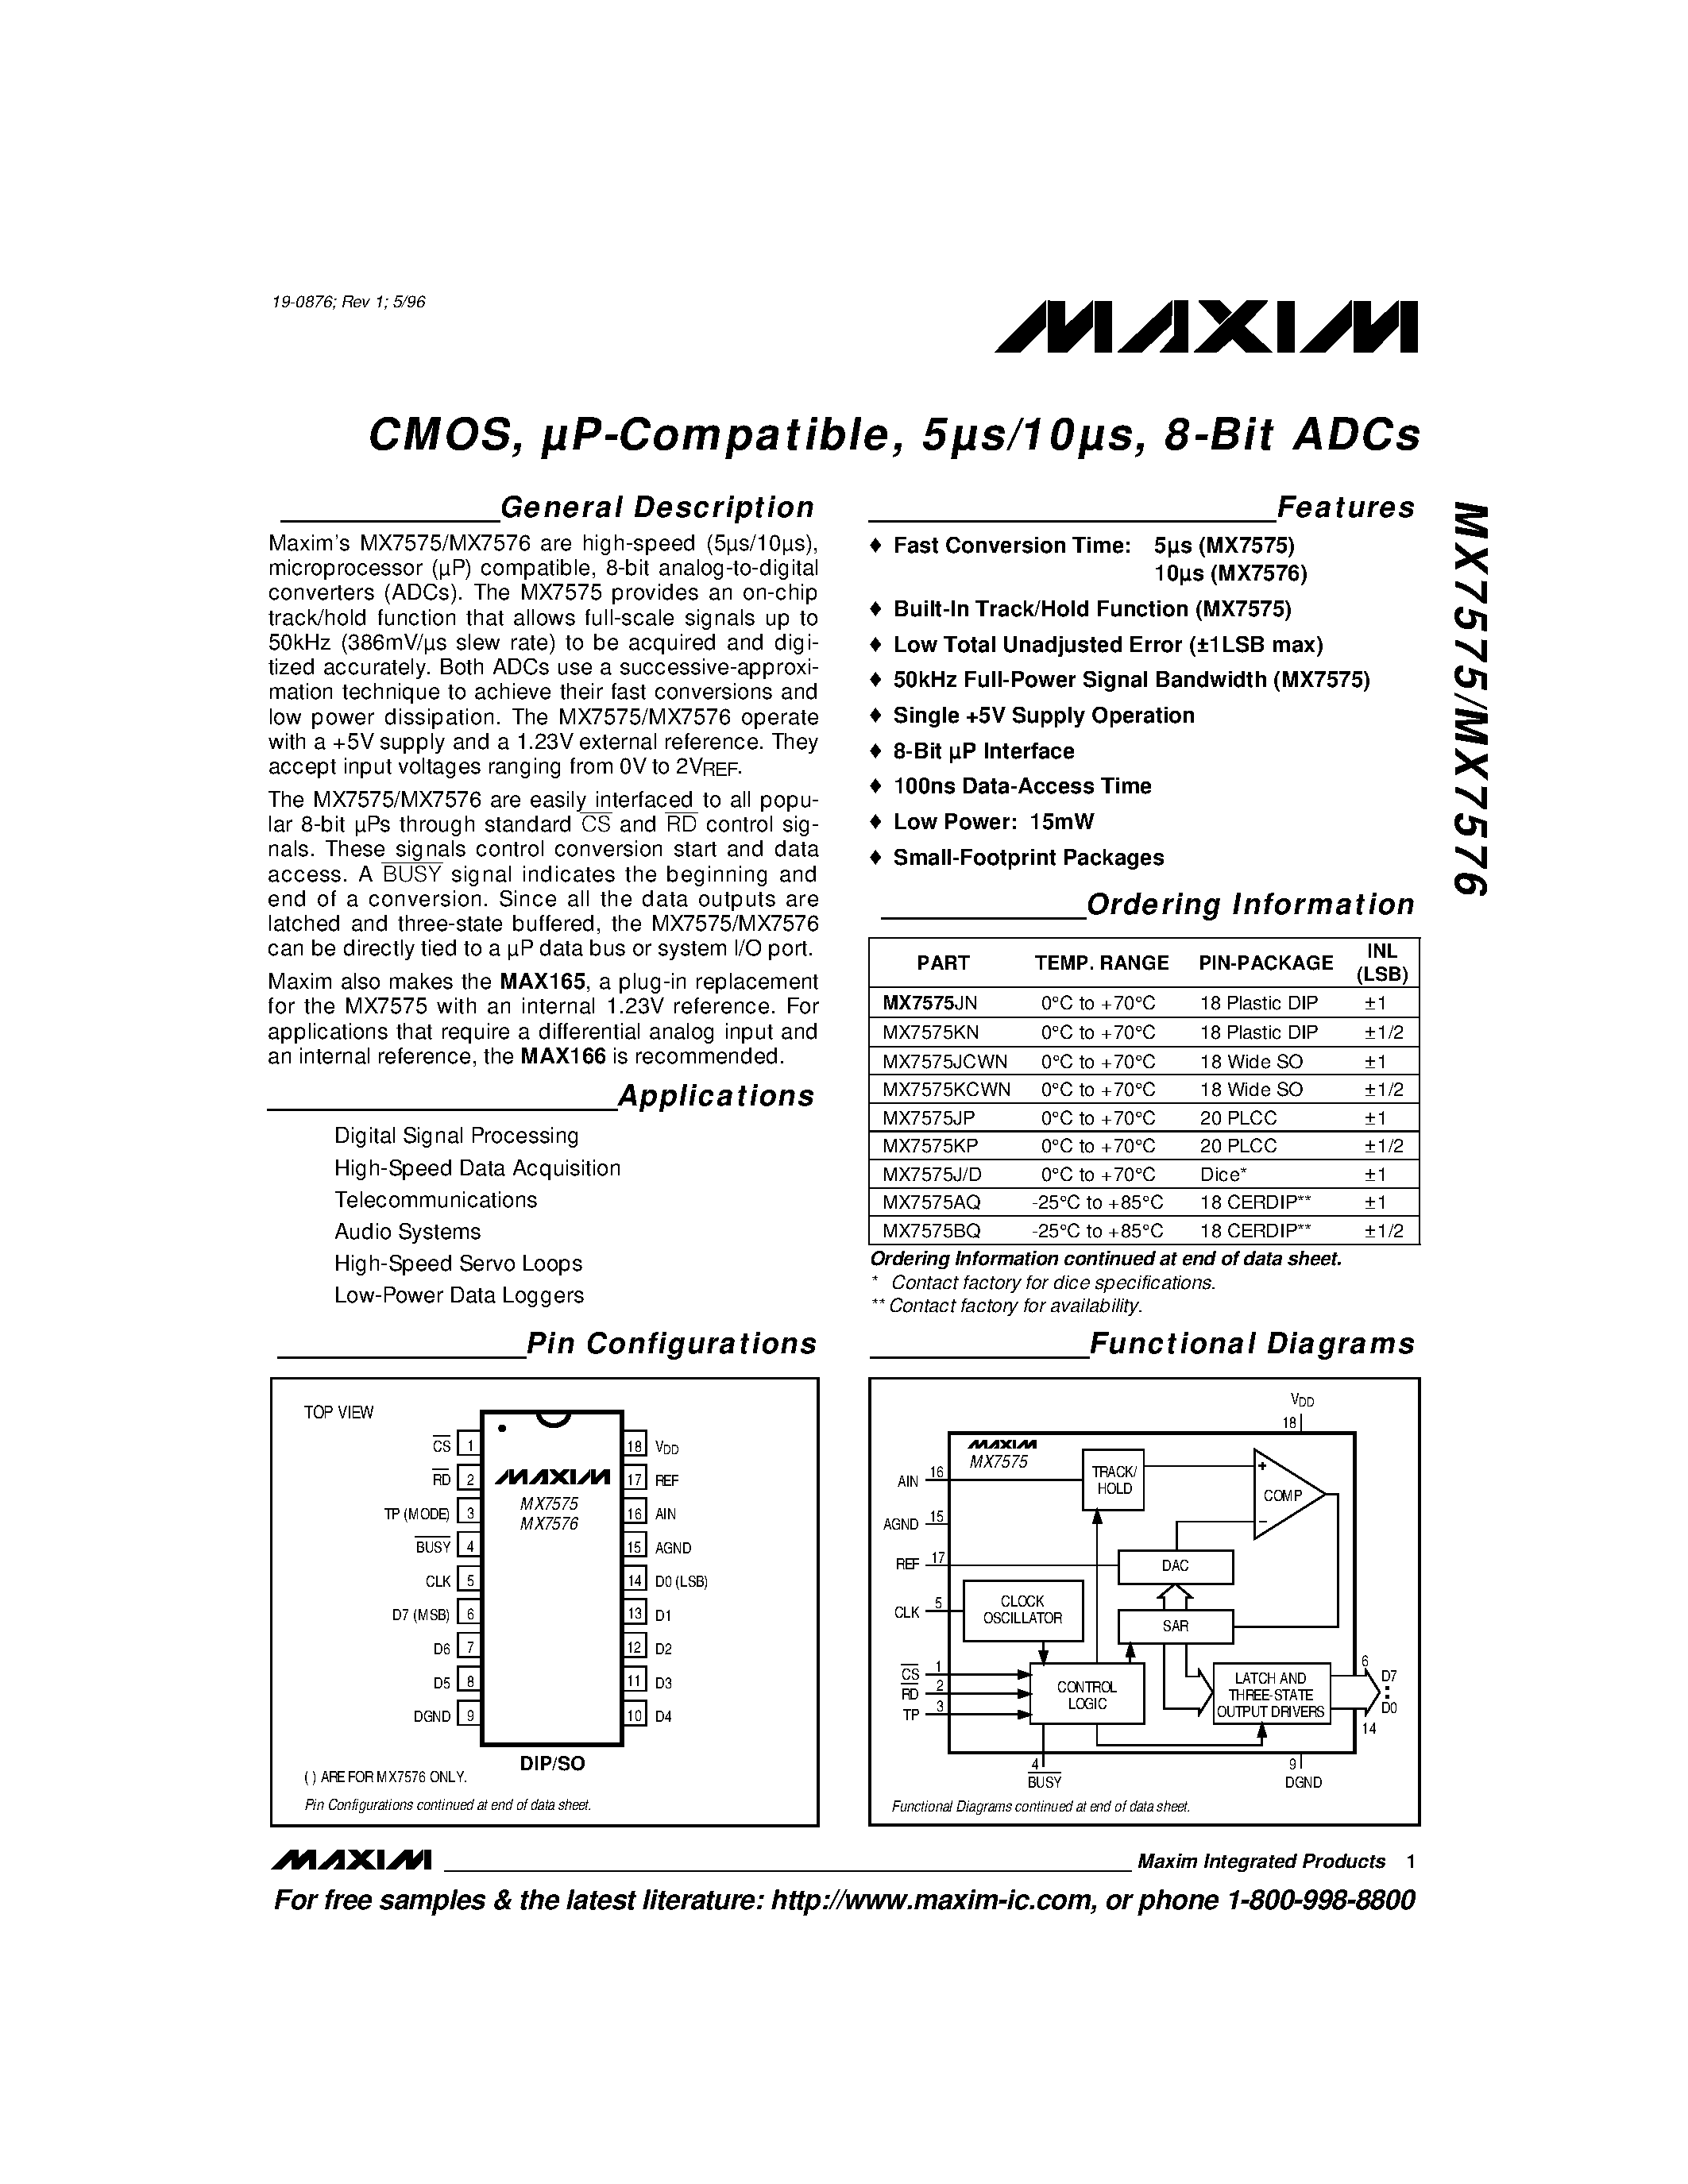 Datasheet MX7576KEQP - CMOS / uP-Compatible / 5s/10s / 8-Bit ADCs page 1